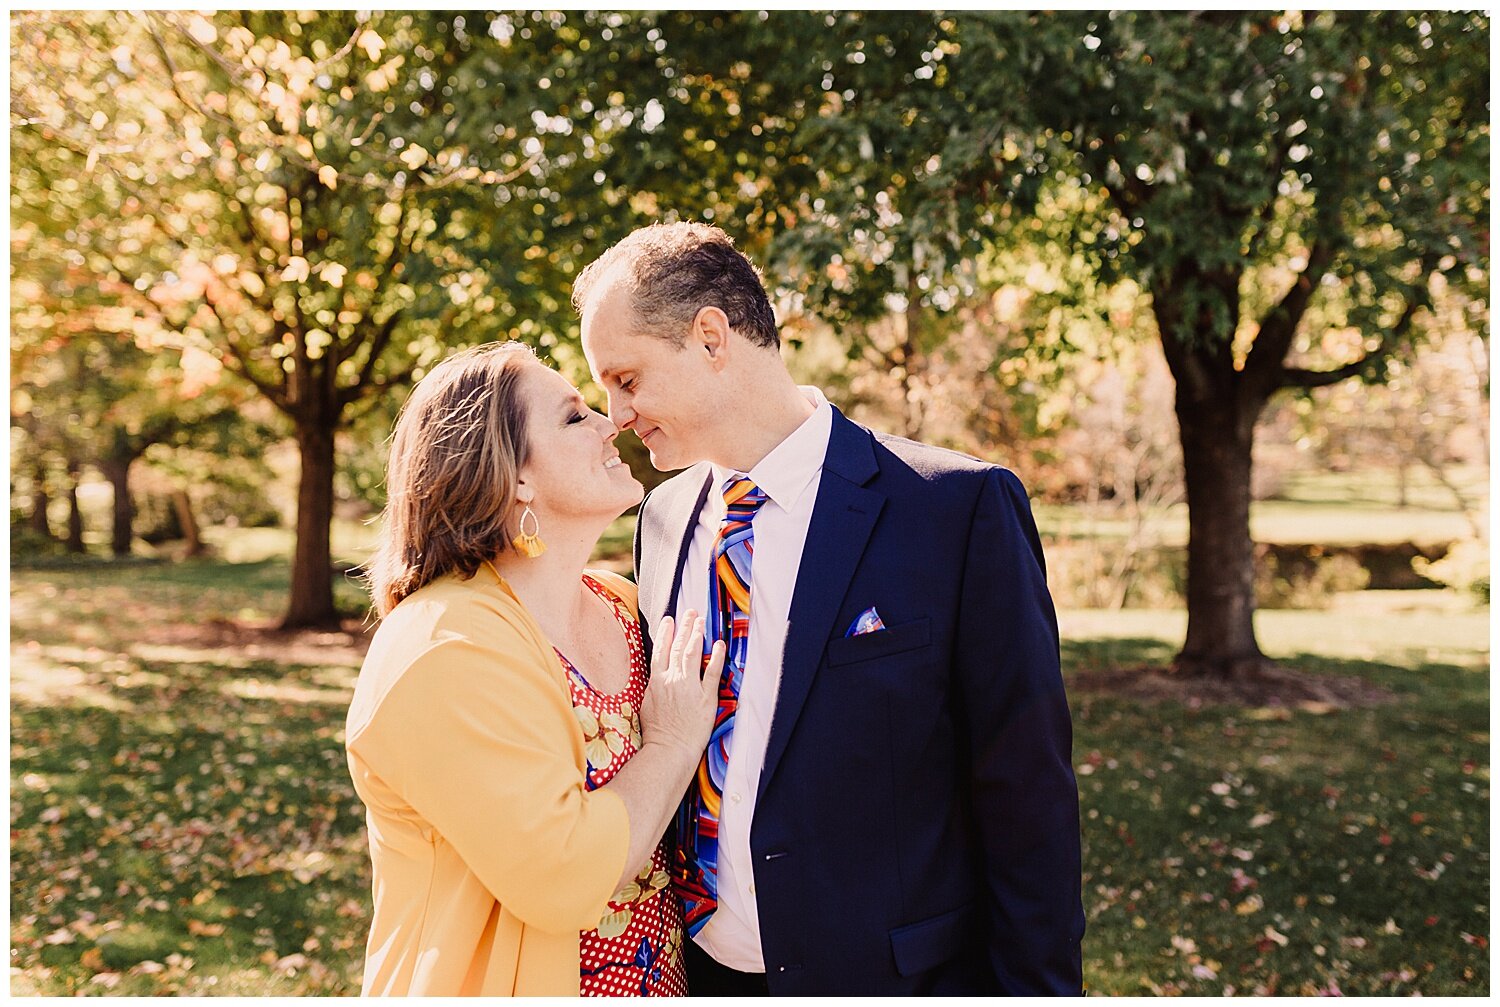  Mom &amp; Dad still taking a moment for each other &lt;3 Don’t let a family session go by without getting a shot like this!  